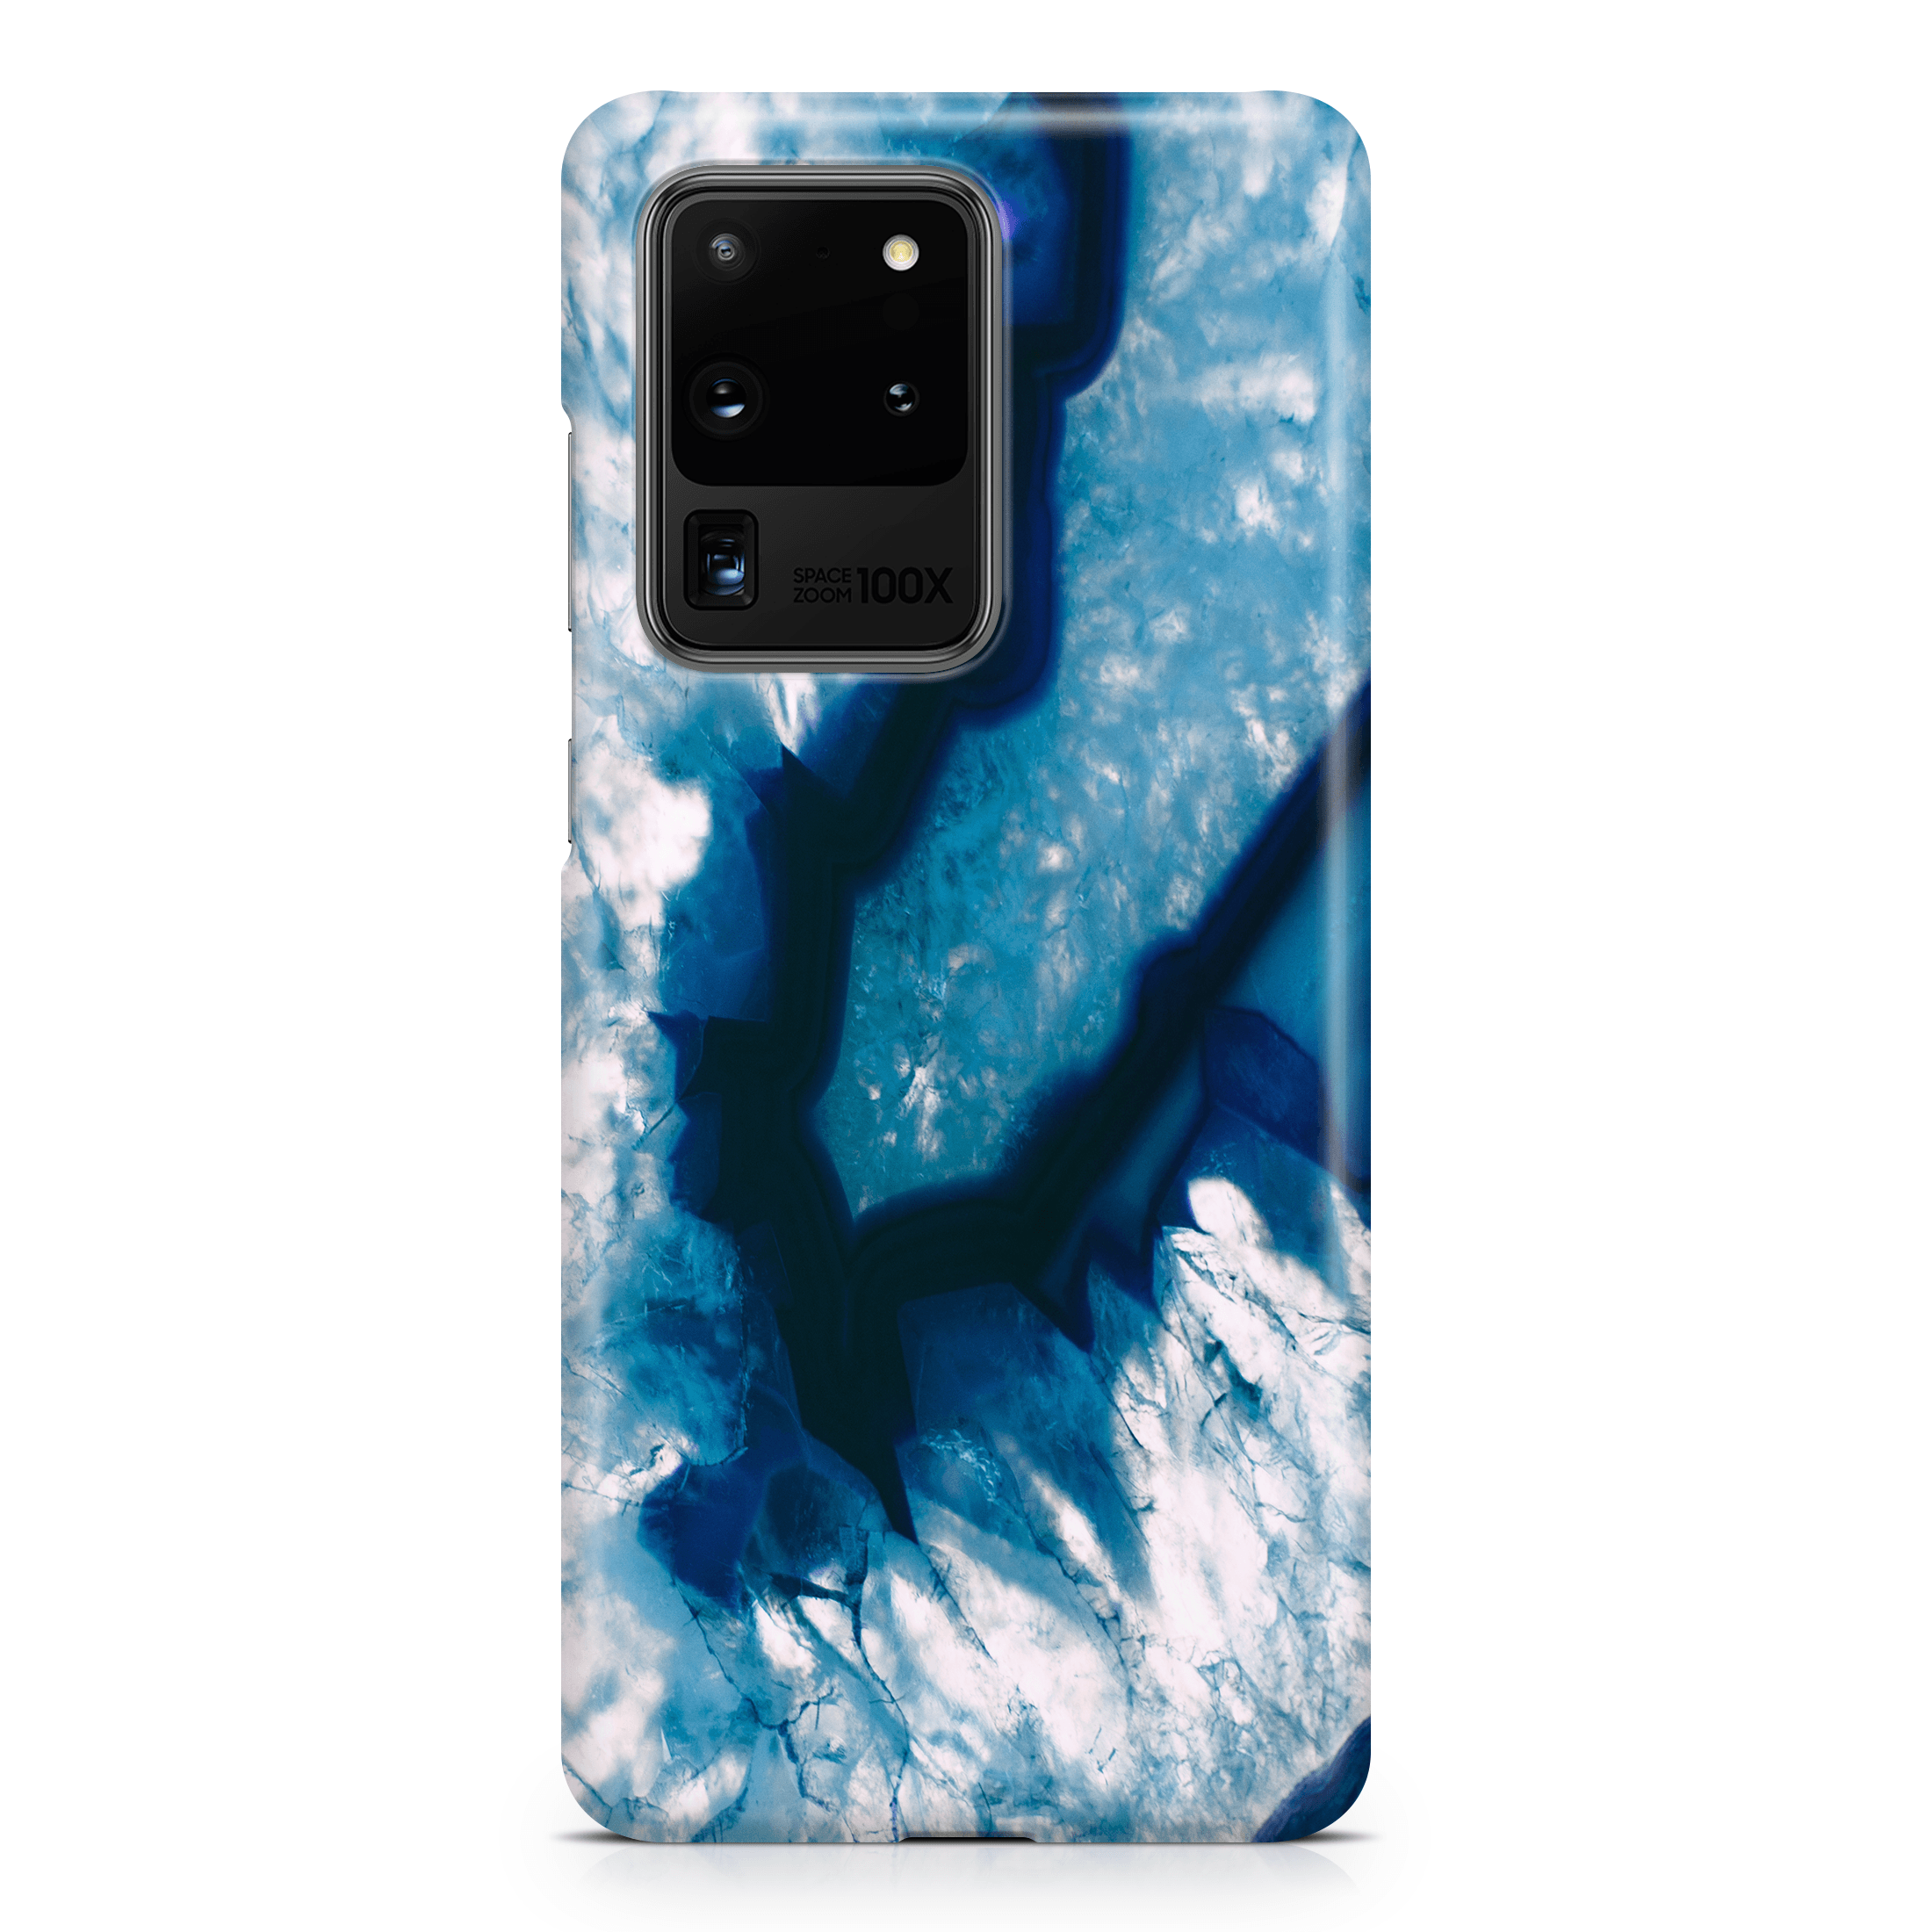 Blue Geode III - Samsung phone case designs by CaseSwagger